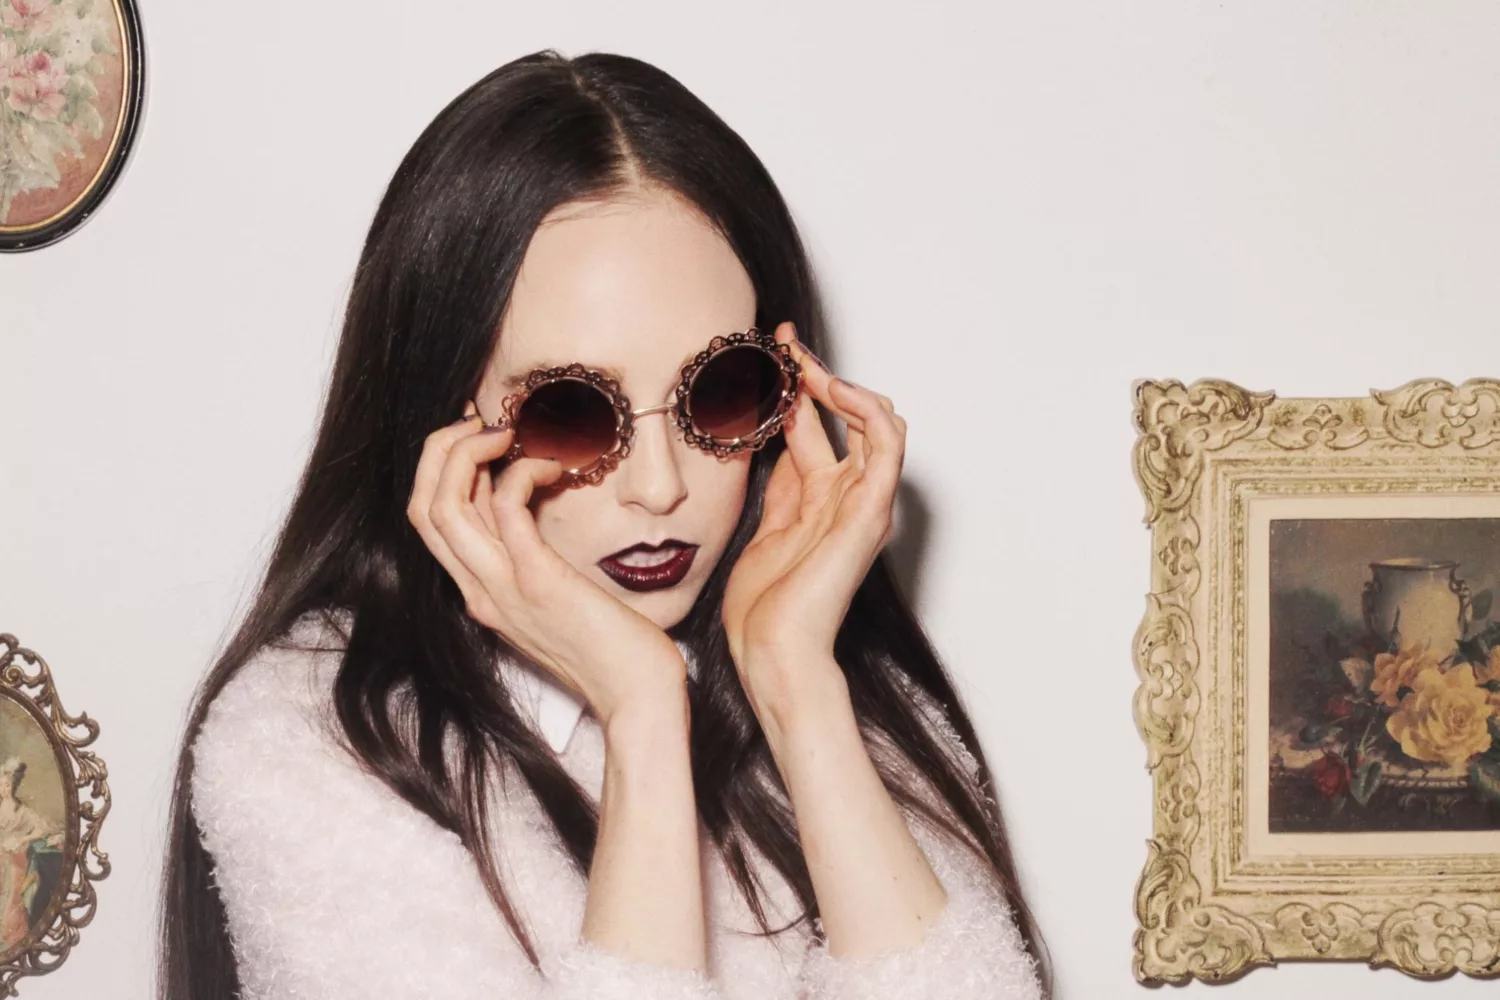 Allie X: “I’m an extreme personality”